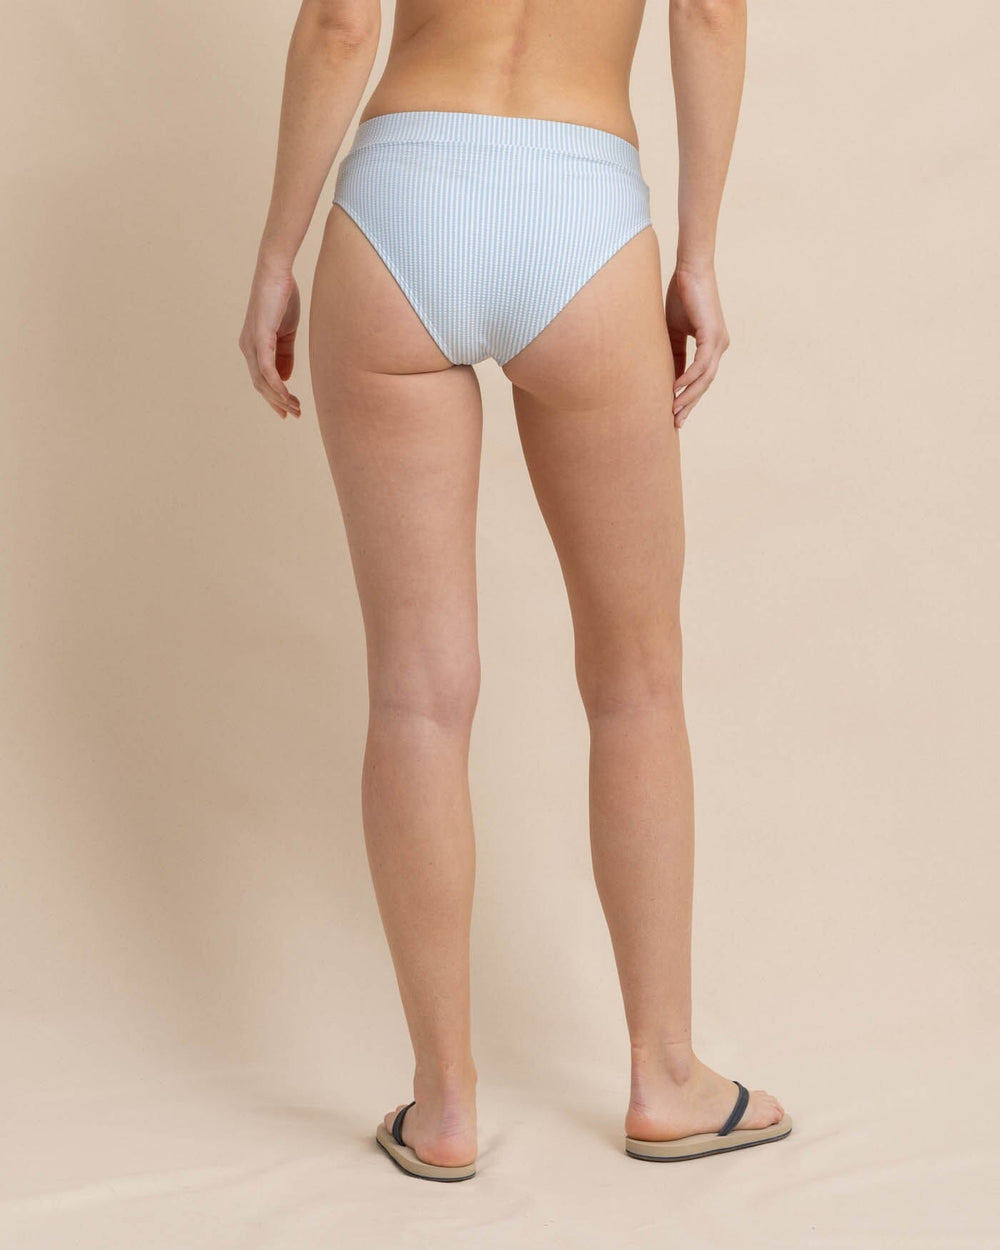 The back view of the Southern Tide Cross Over Bikini Bottom in Seersucker by Southern Tide - Clearwater Blue